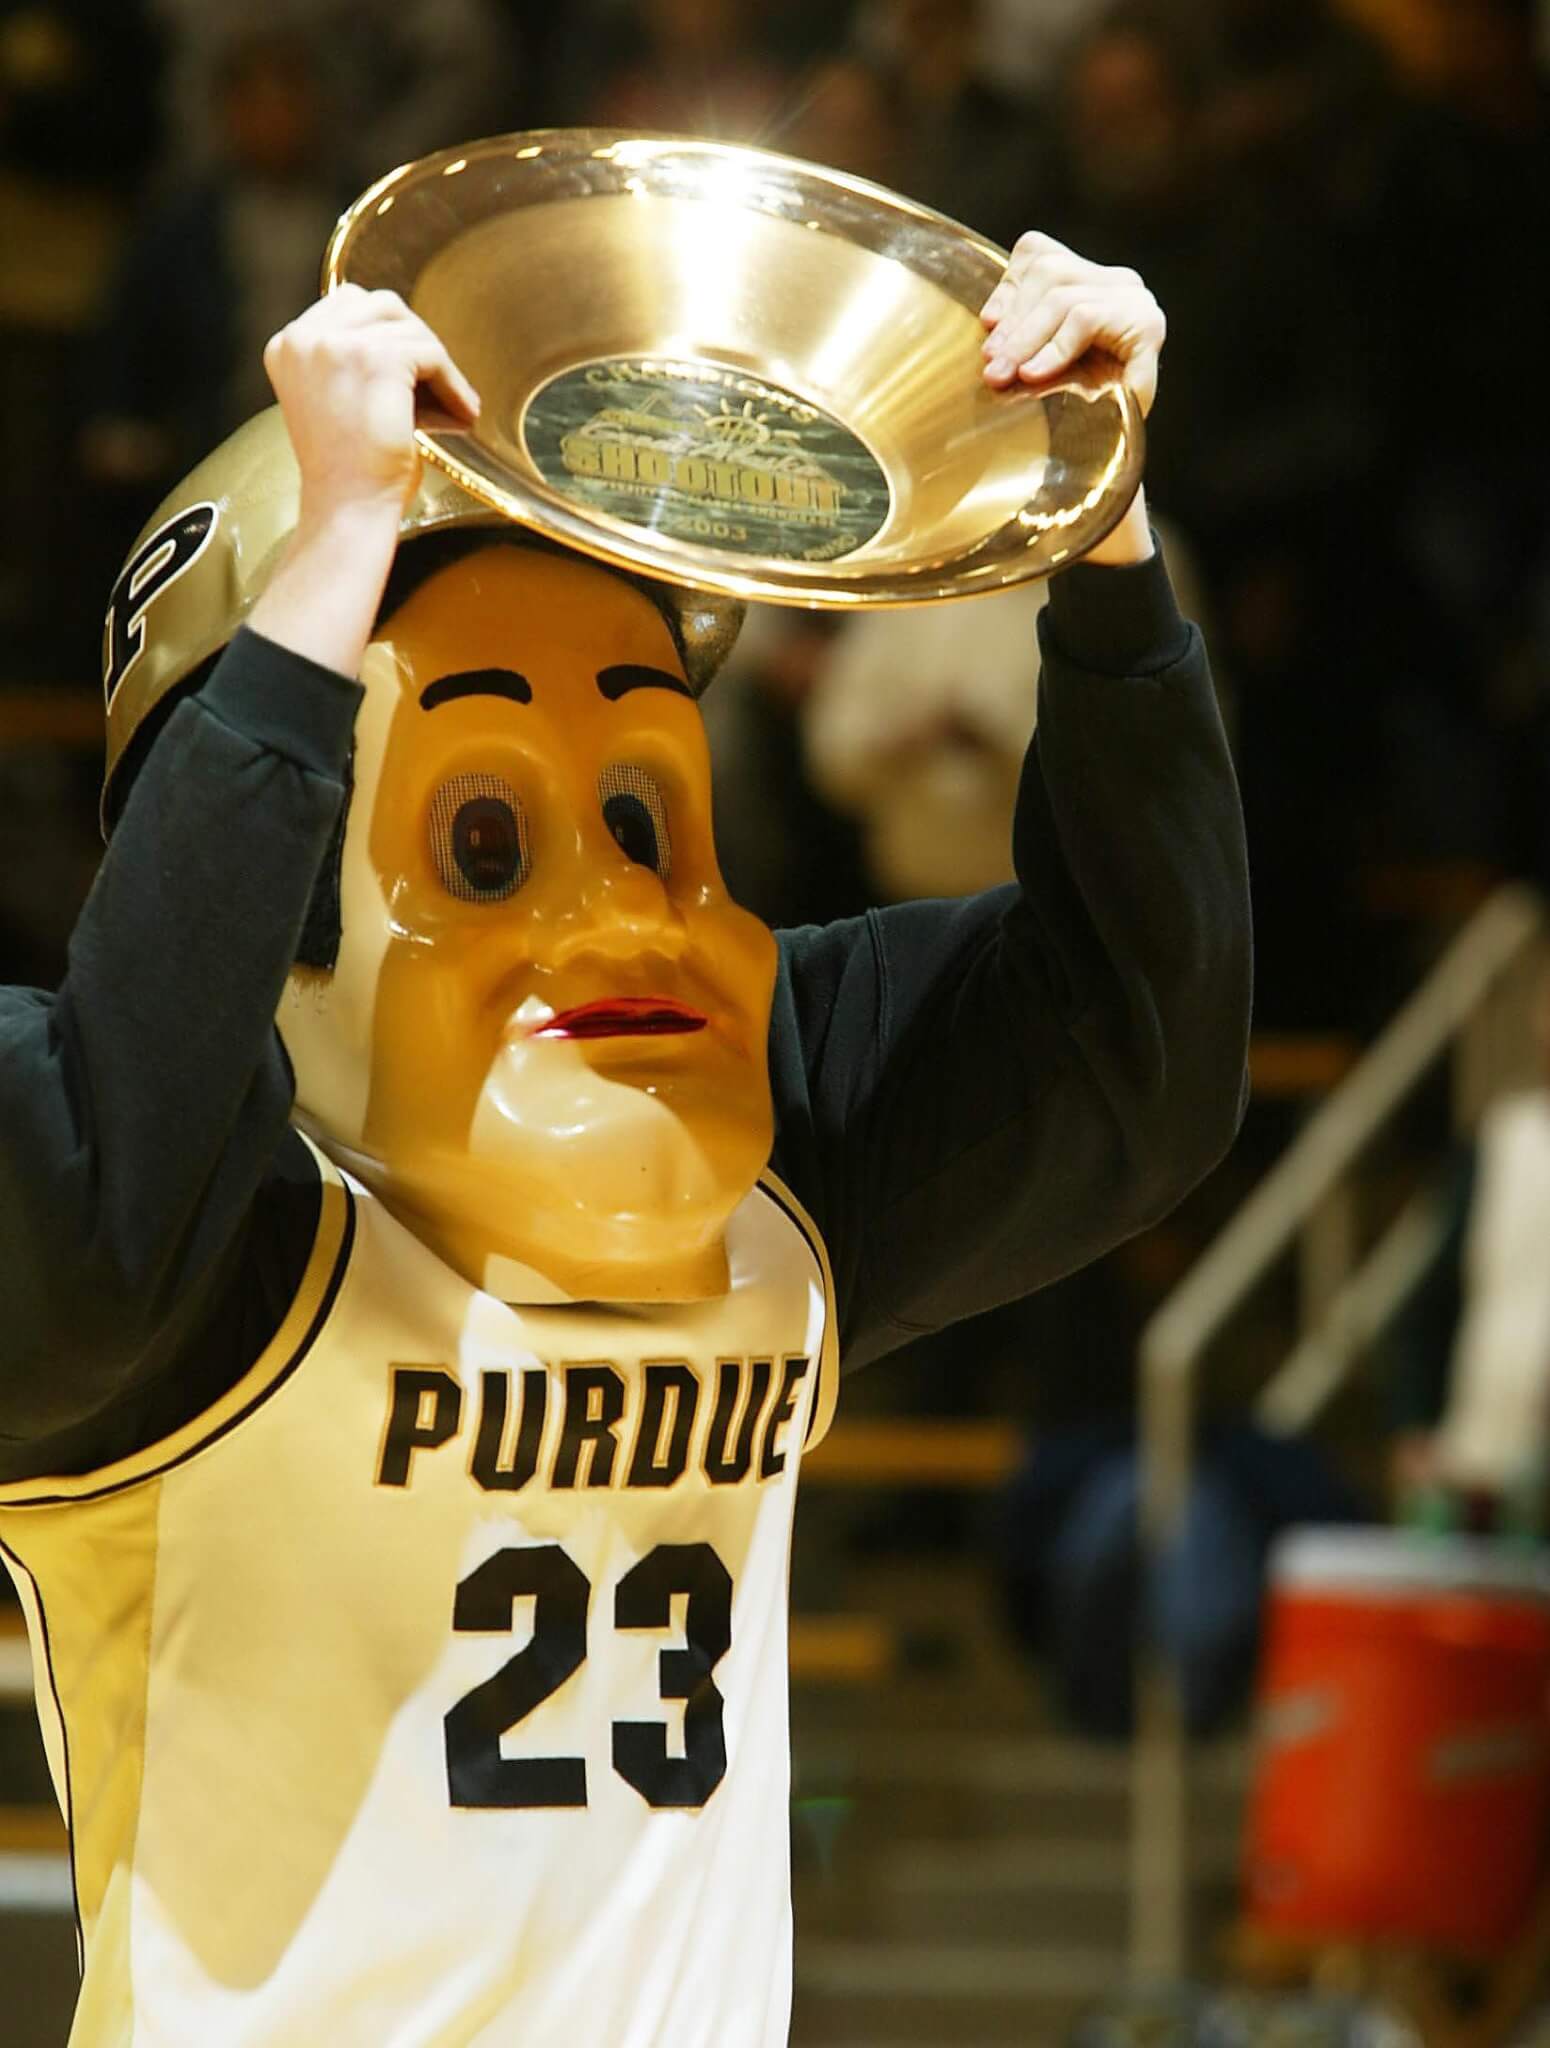 Andy Fordice, shown displaying Purdue's 2003 Great Alaska Shootout trophy to the Mackey Arena crowd, earned a spot in ESPN's Top 10 Plays of the Day when he crowd surfed across the court on a wave of Purdue fans. (Photo by Tom Campbell)